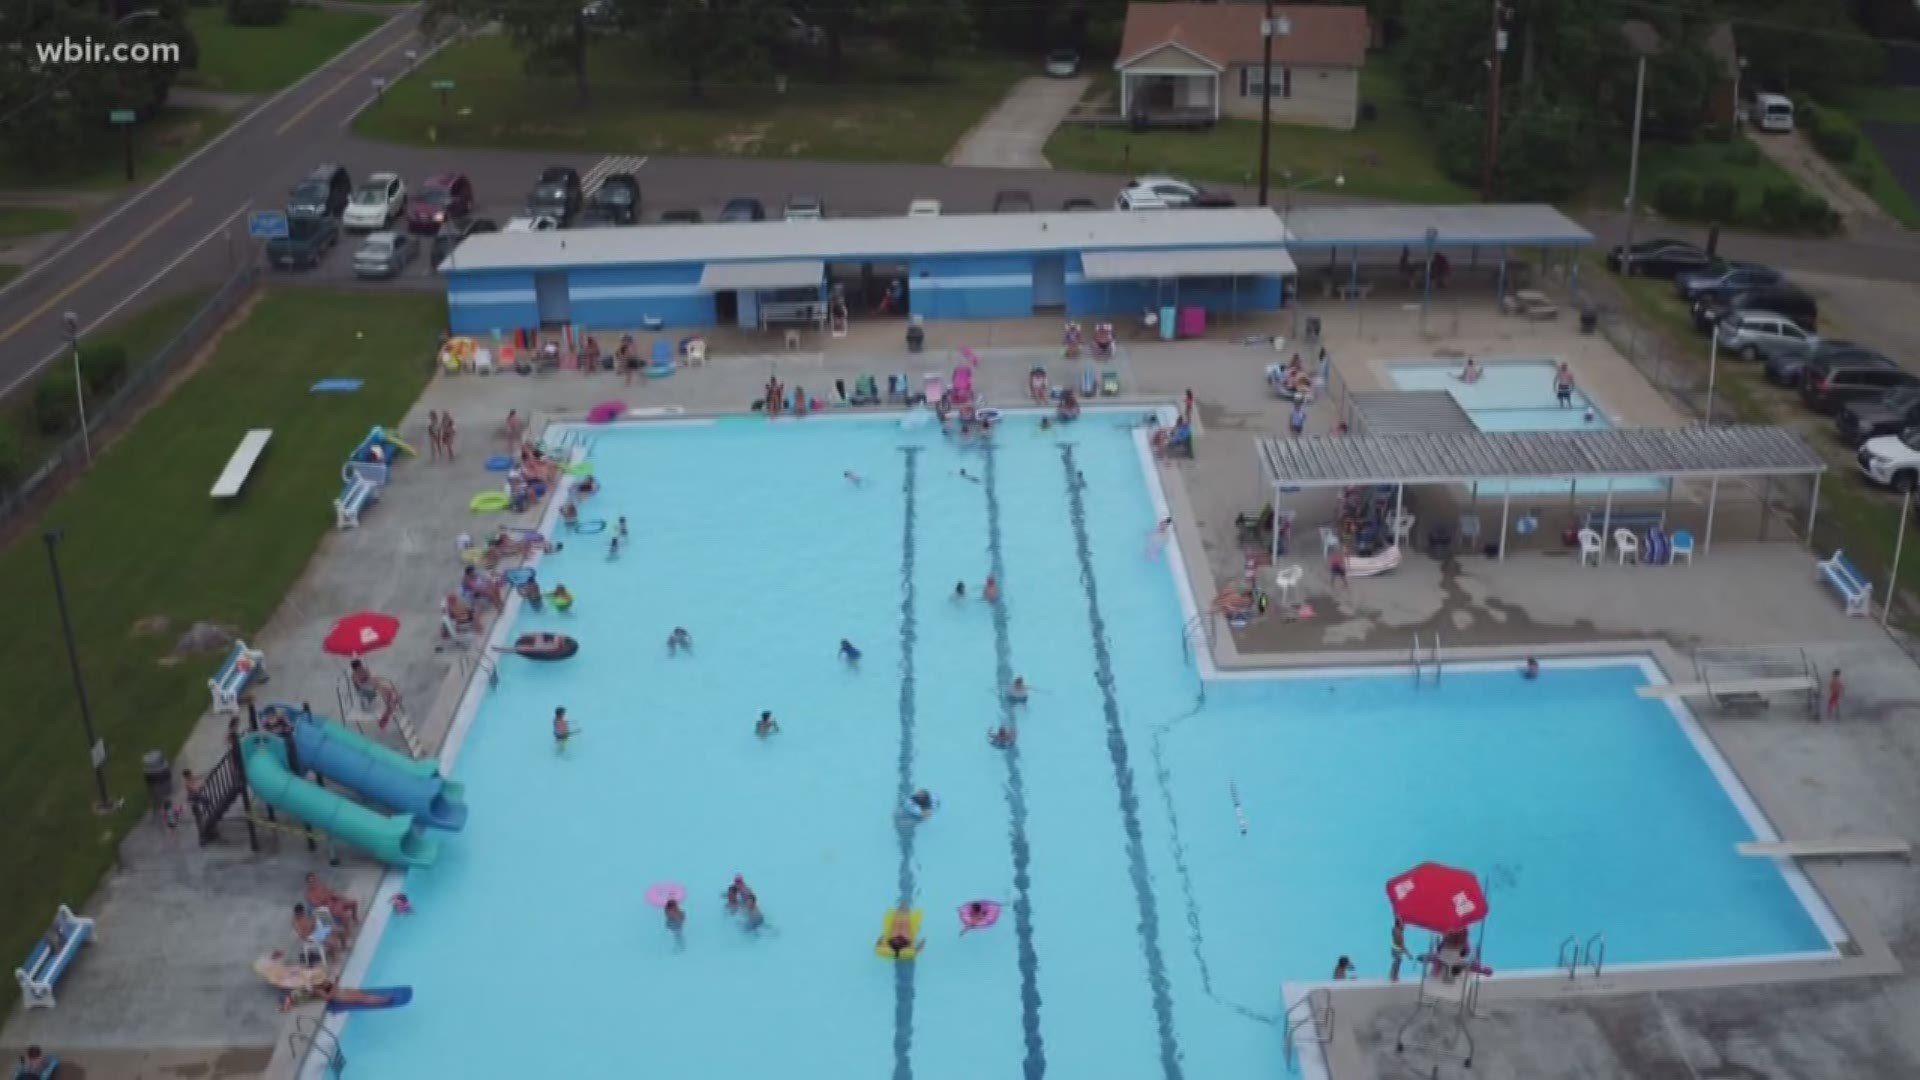 Alice Bell Community Pool in North Knoxville is celebrating 50 years of fun in the sun.